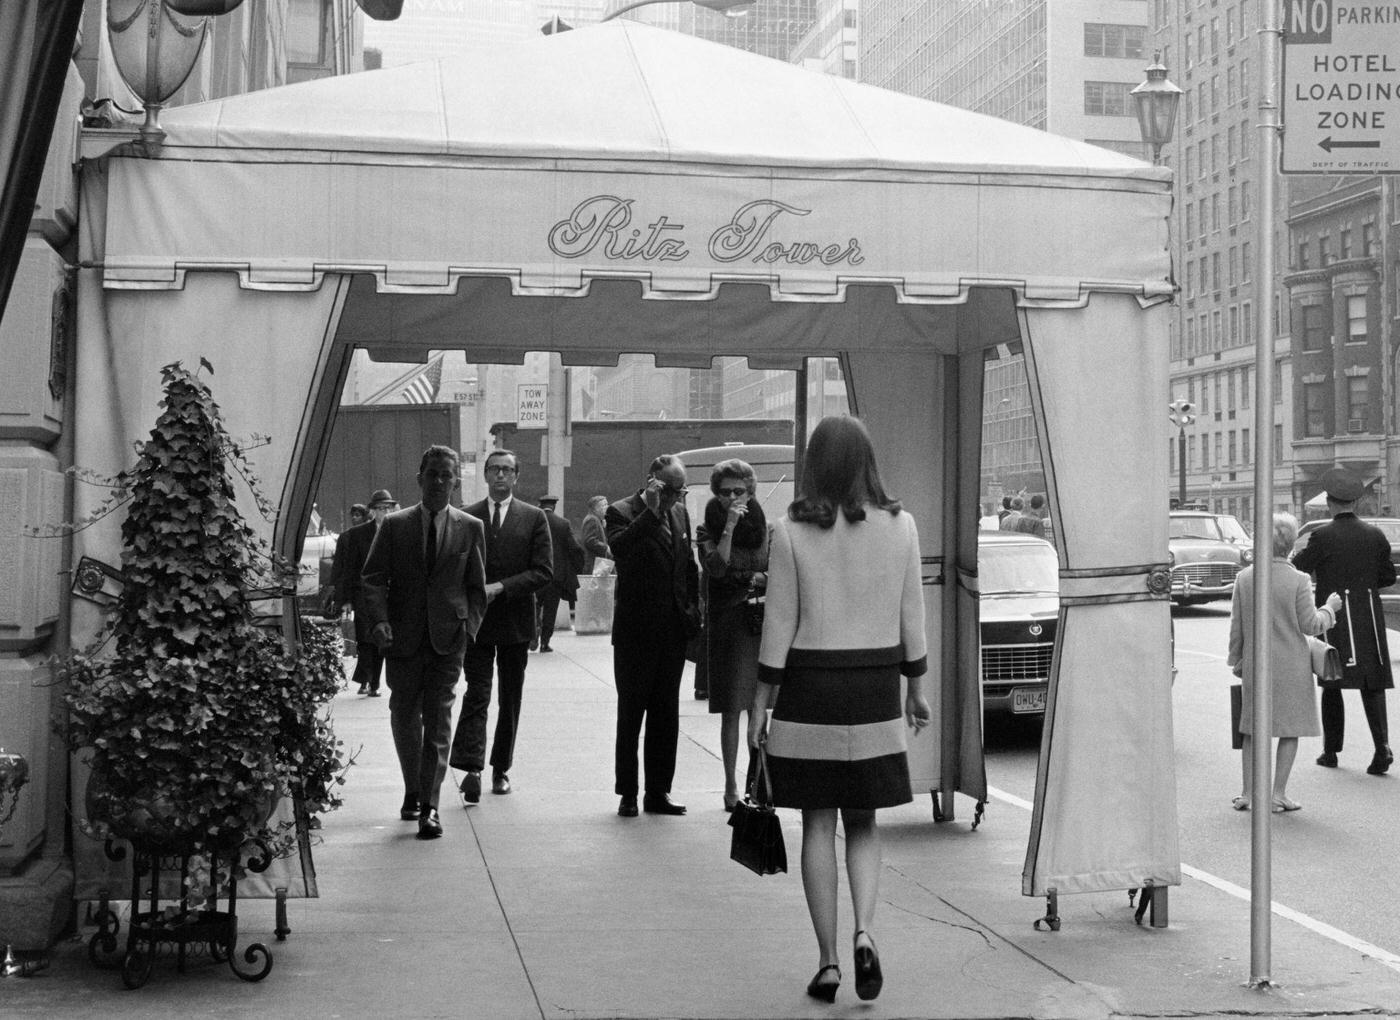 Pedestrians Walking Beneath The Covered Entrance To The Ritz Tower On Park Avenue In Midtown Manhattan, 1967